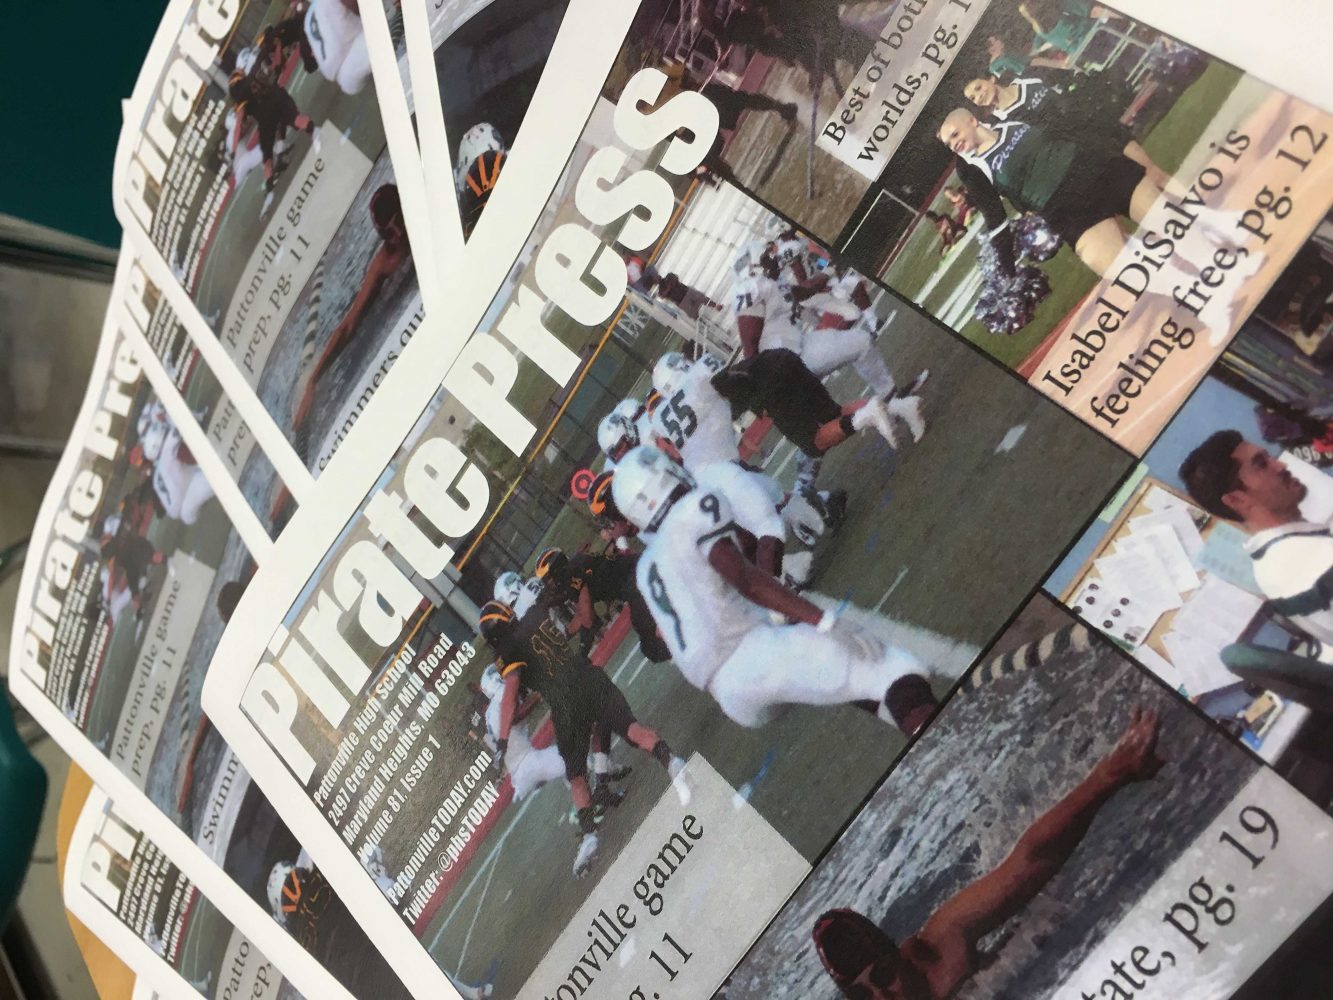 ISSUE Read the September 2016 issue of the Pirate Press